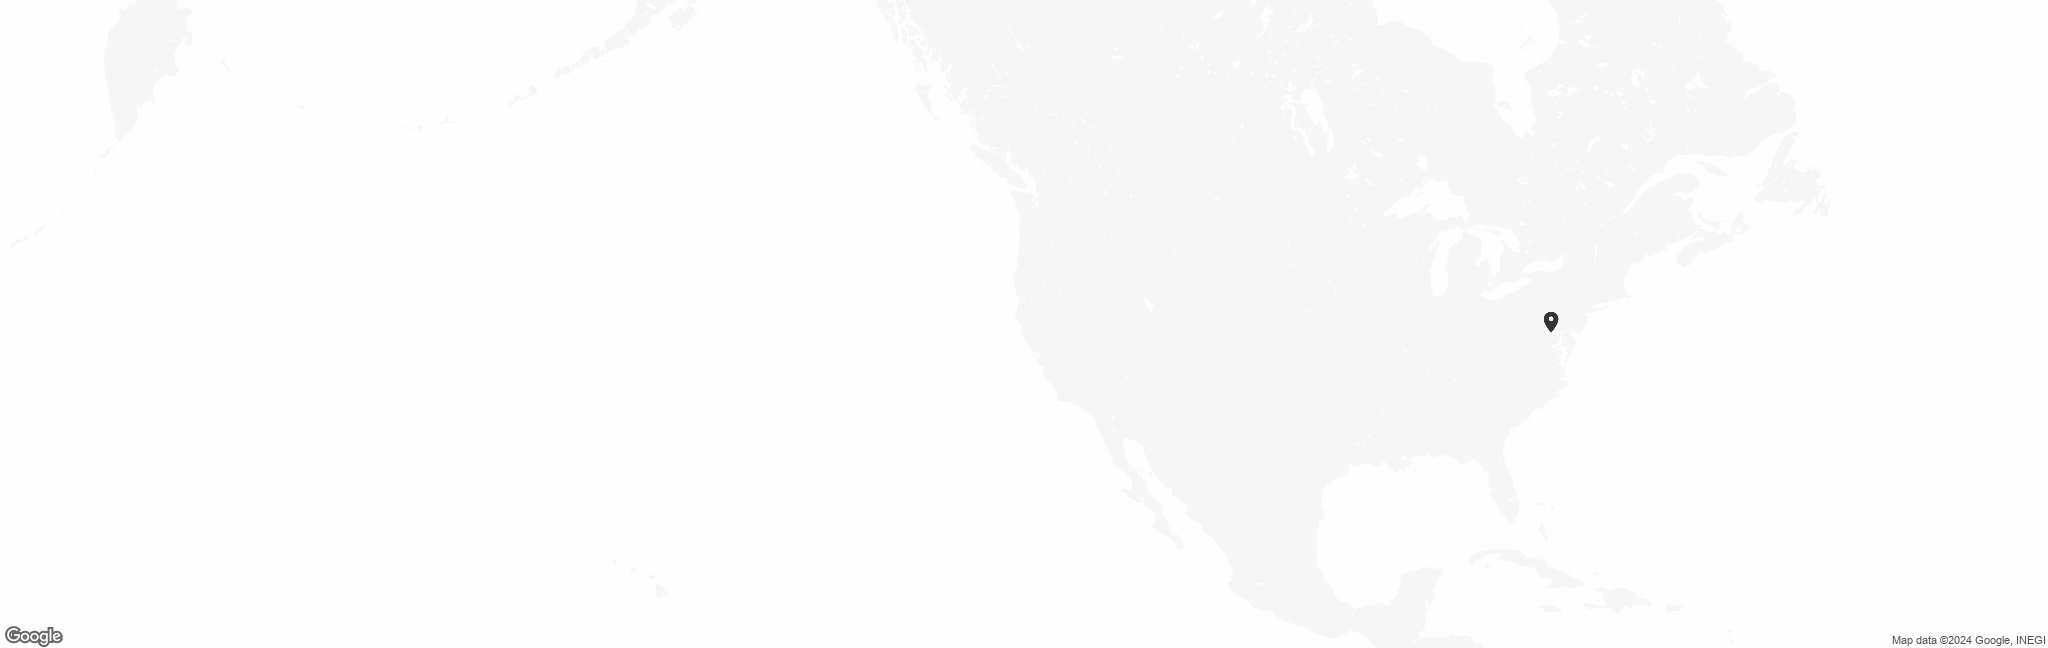 Map of US with pin of Sleep Centers of America, Inc. location